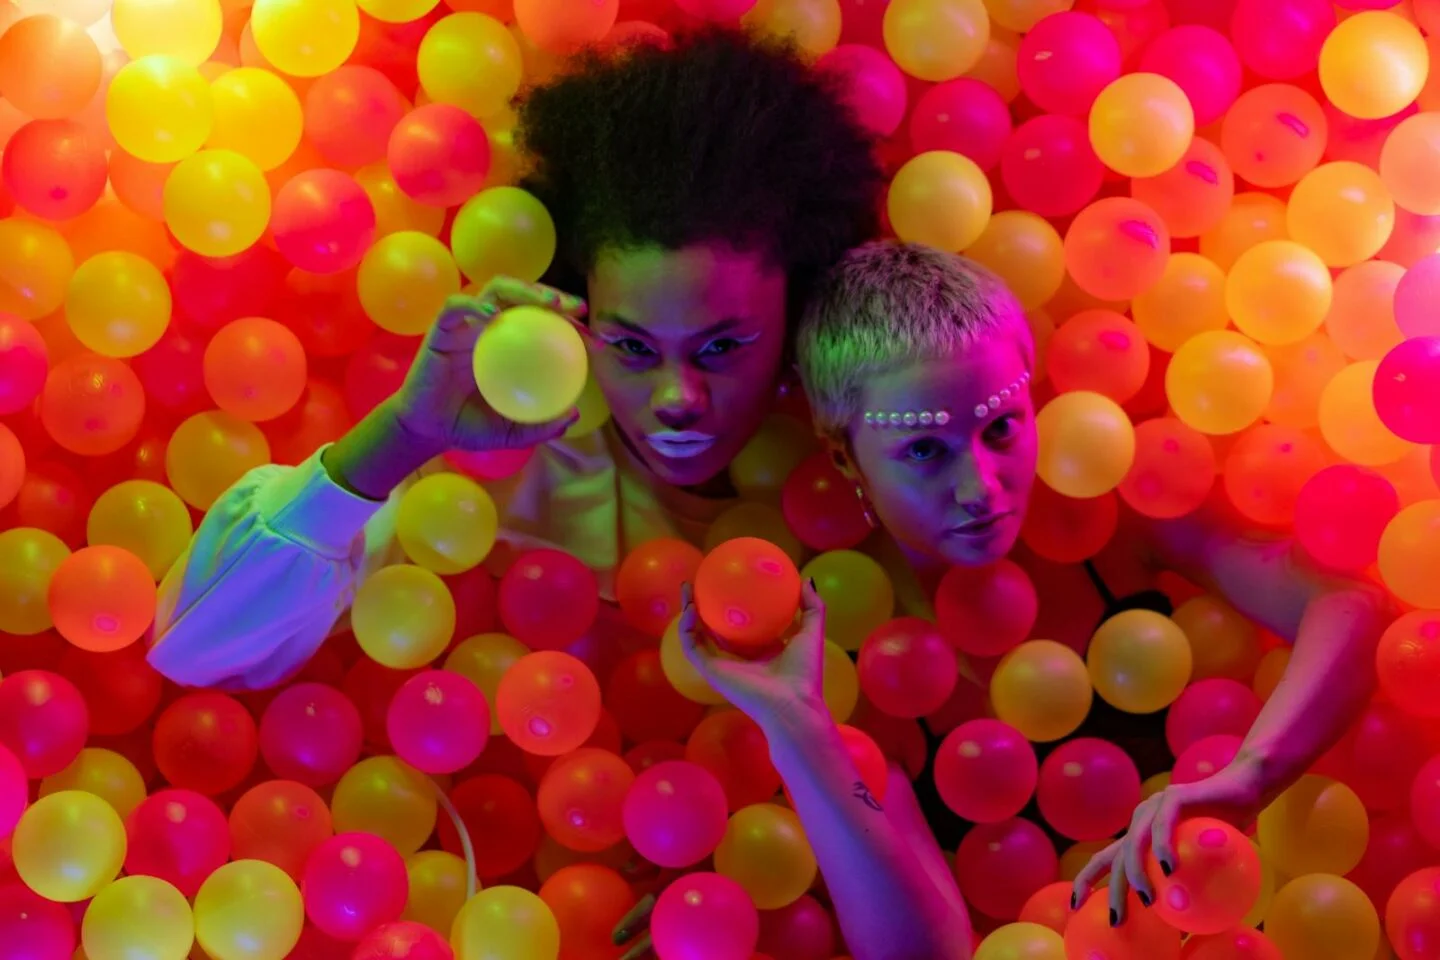 Women Holding Colorful Balls while Seriously Looking at the Camera